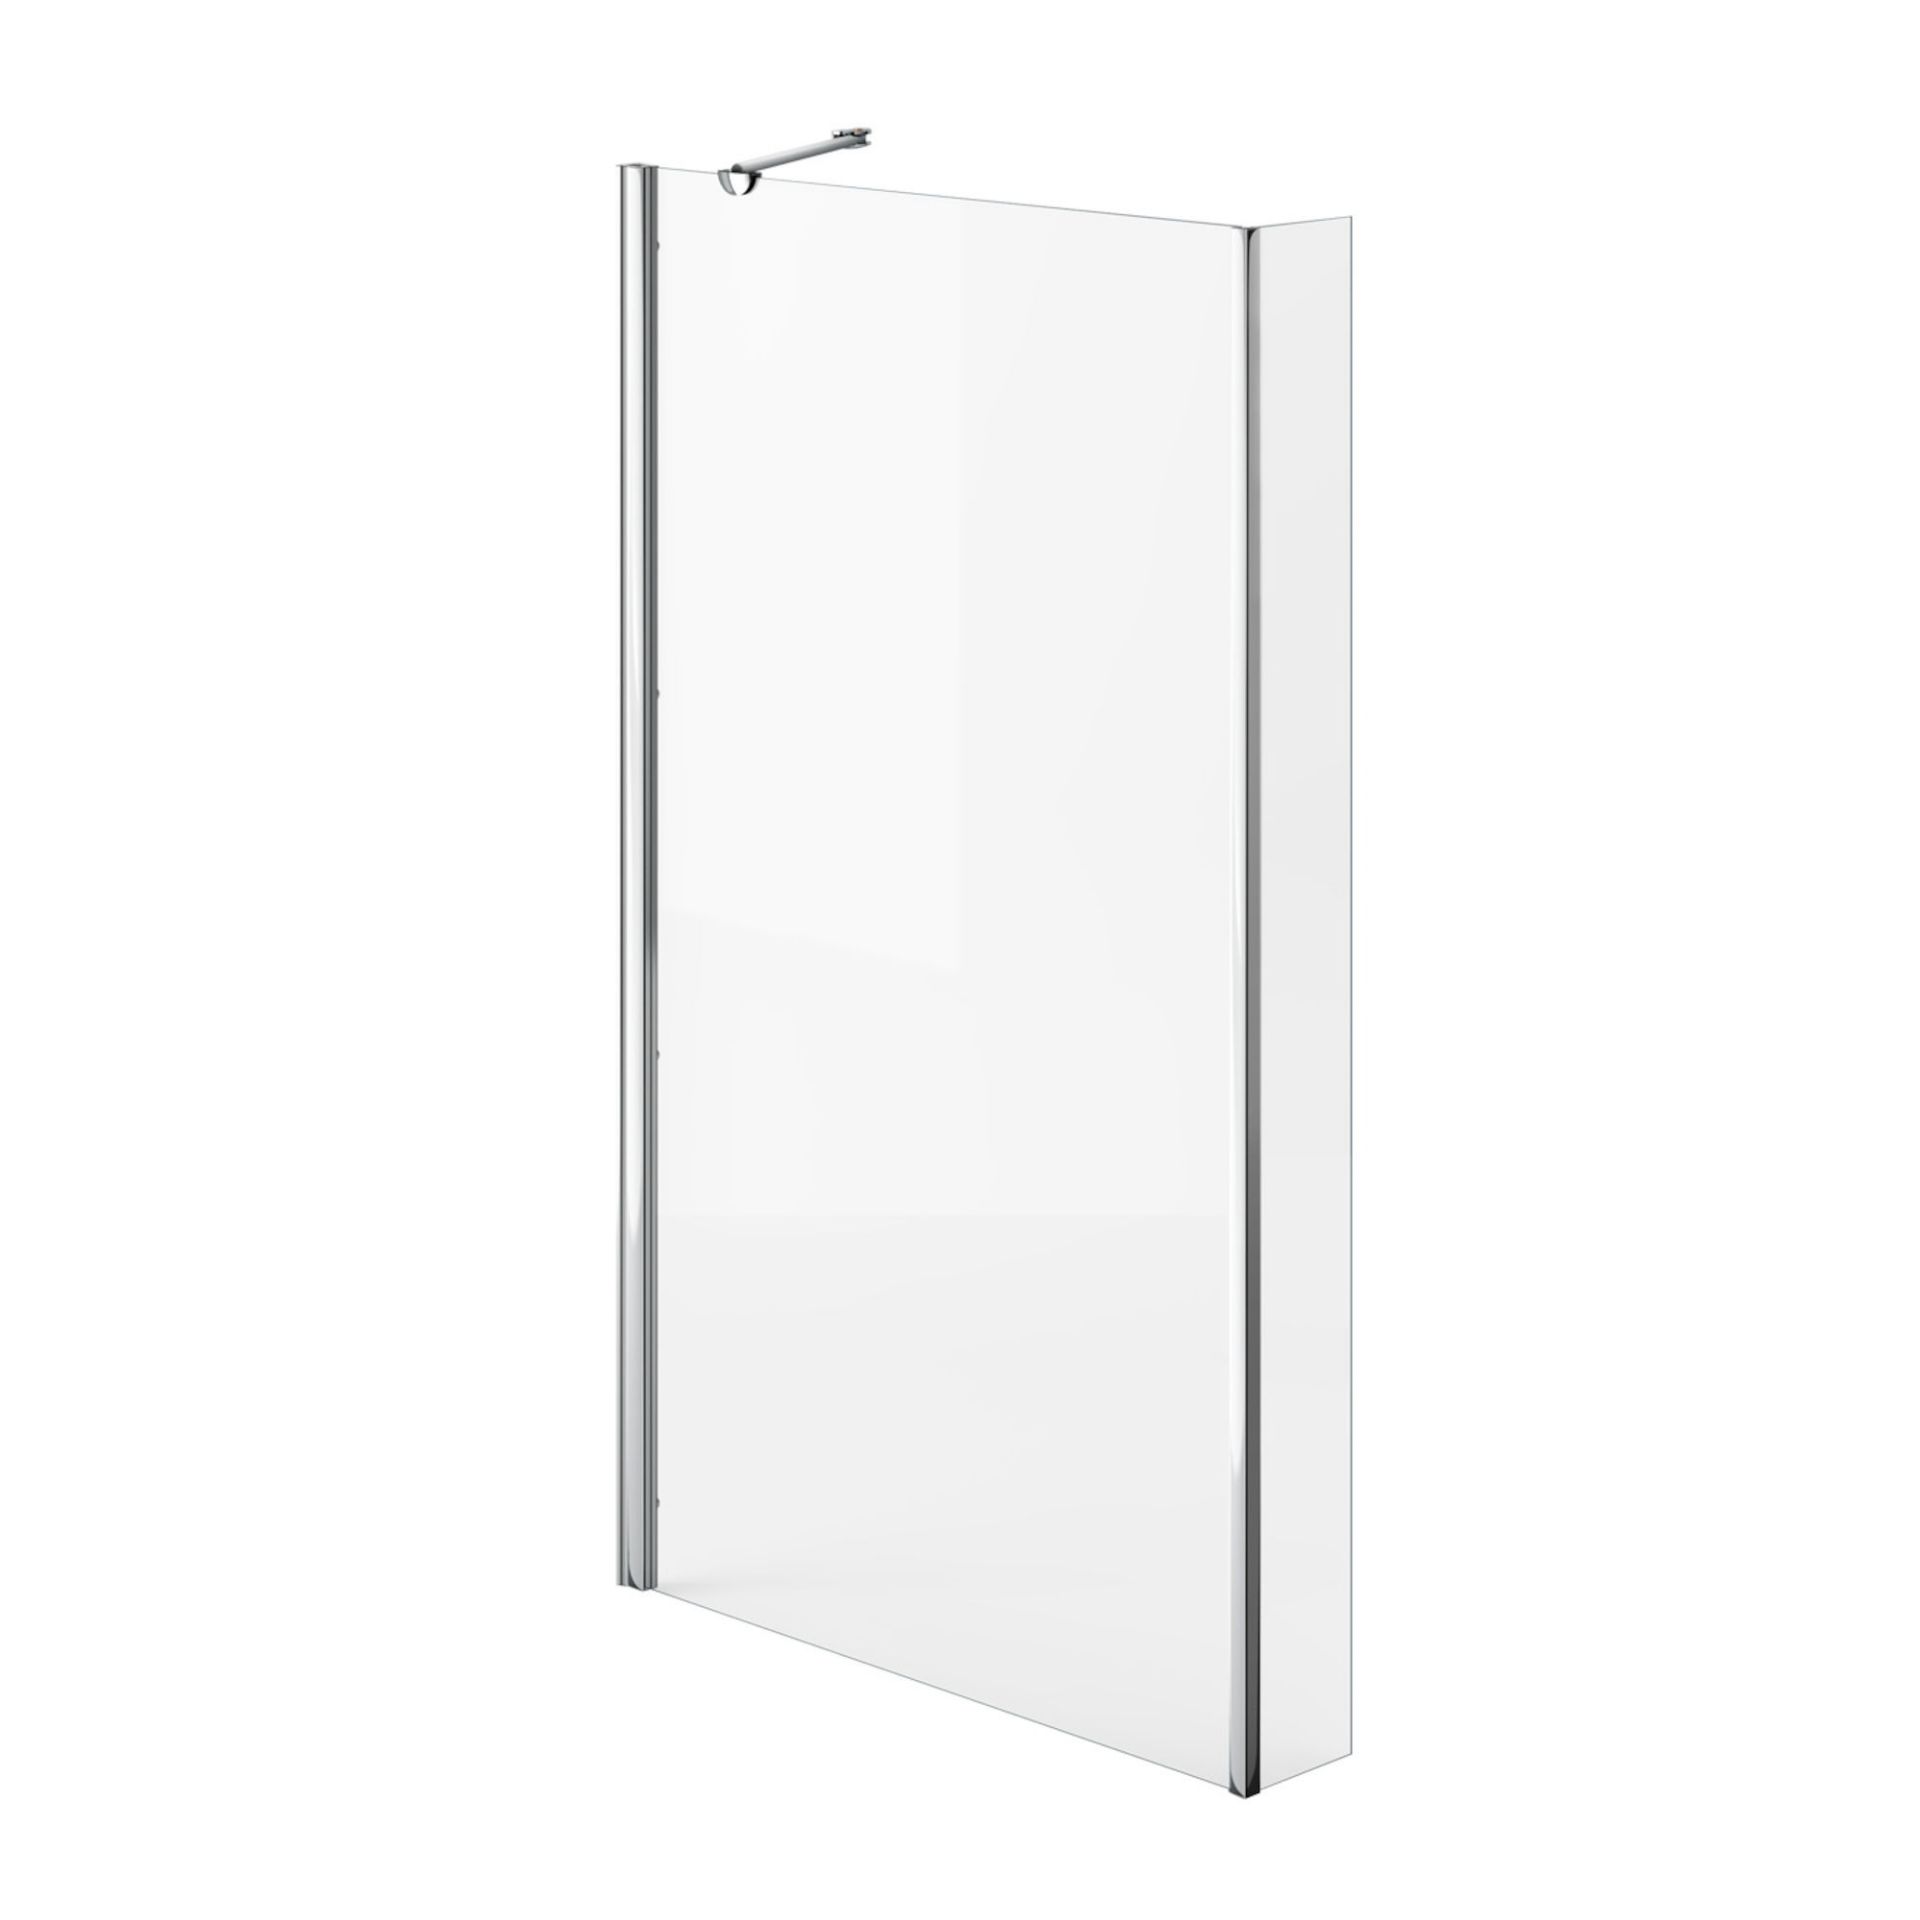 (TT67) 805mm L Shape Bath Screen. RRP £189.99. 4mm Tempered Saftey Glass Screen comes complete...